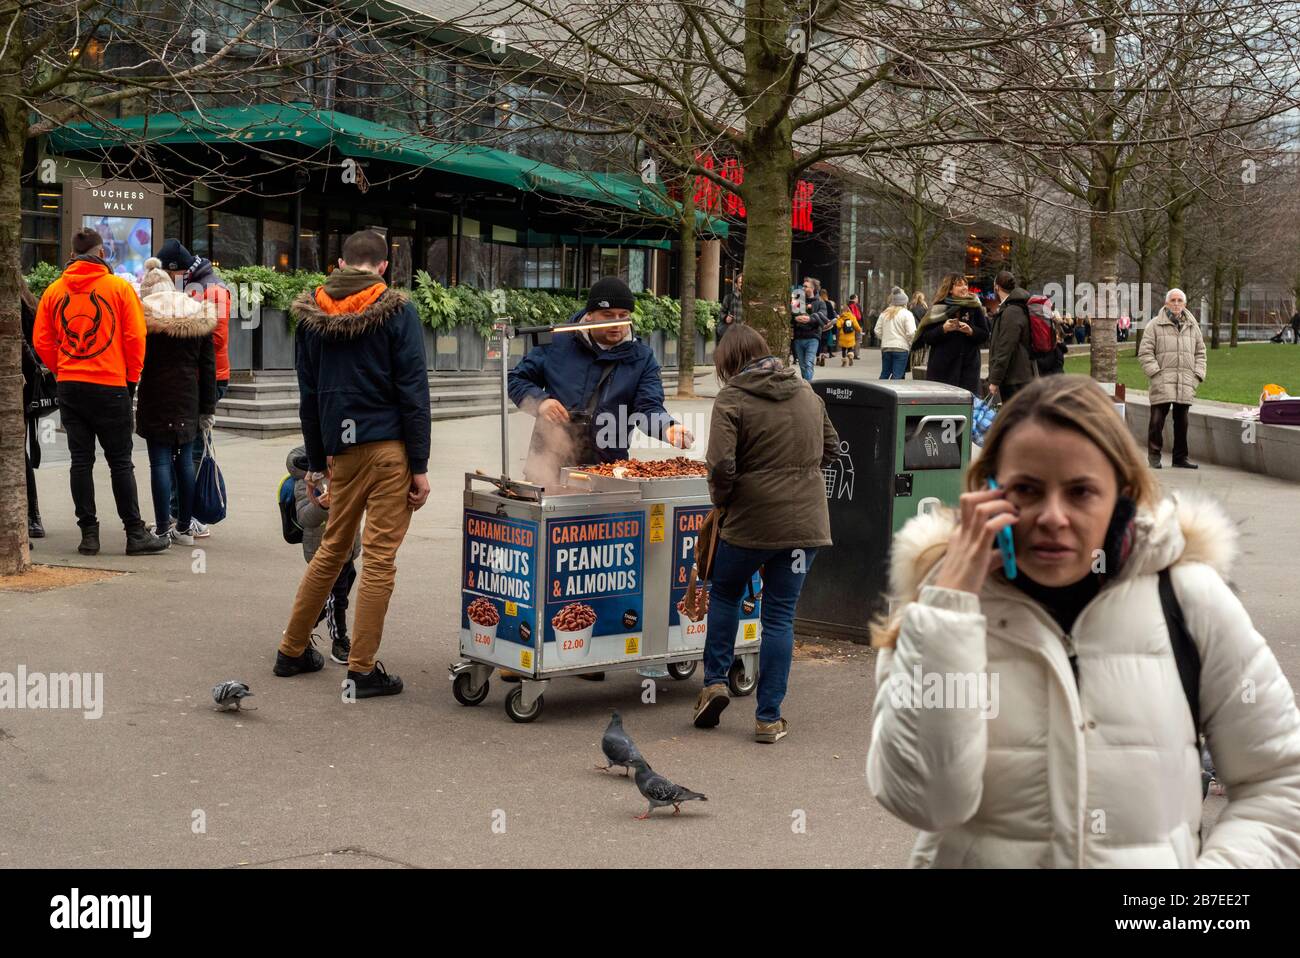 People buying caramelised peanuts and almonds from street food vendor with heated mobile stall at the South Bank Queen's Walk in London, UK as of 2020 Stock Photo